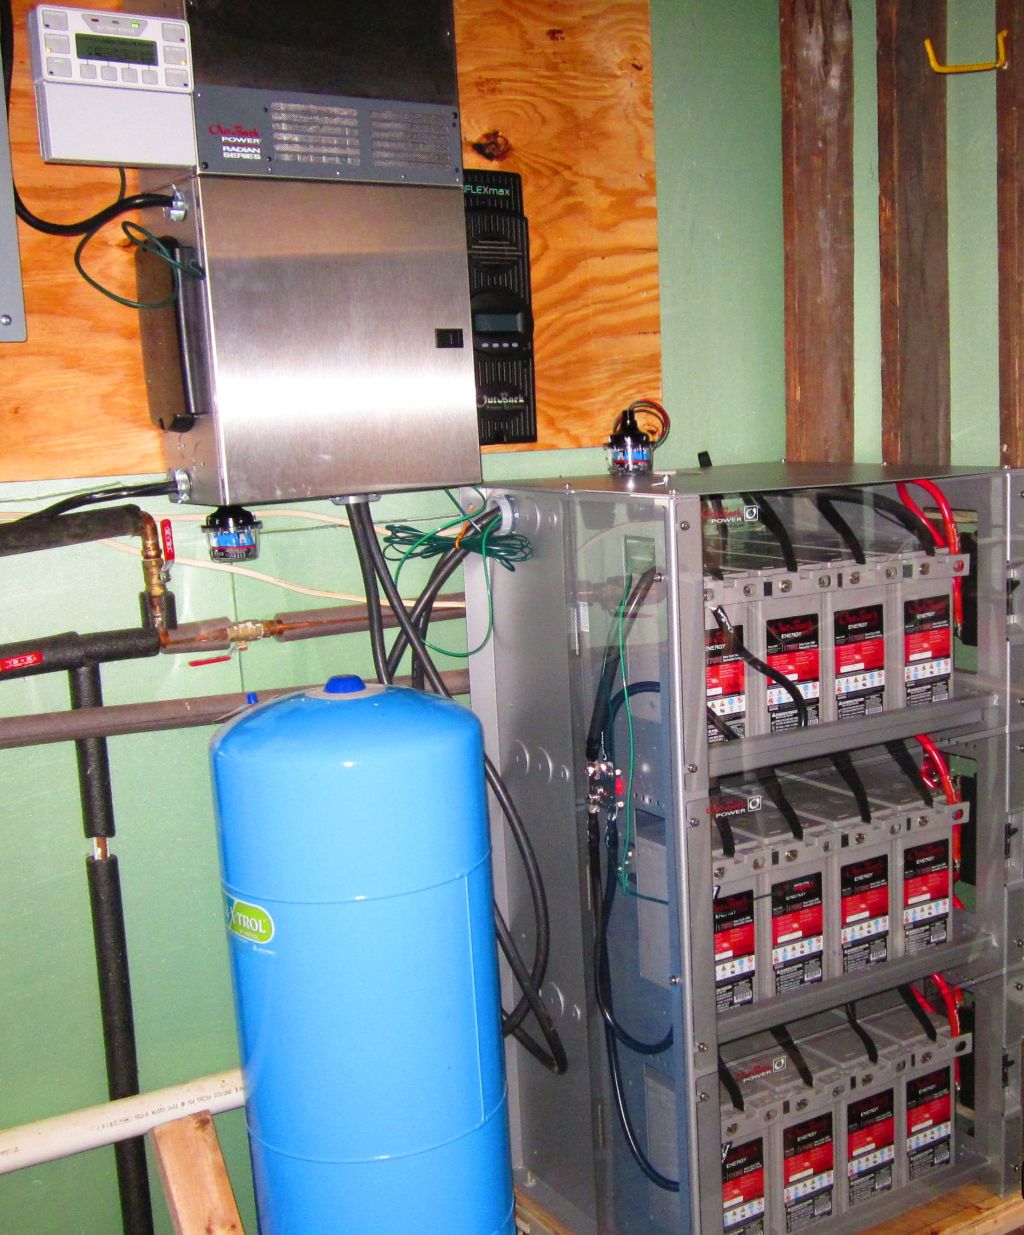 Outback Radian Inverter and Outback Batteries